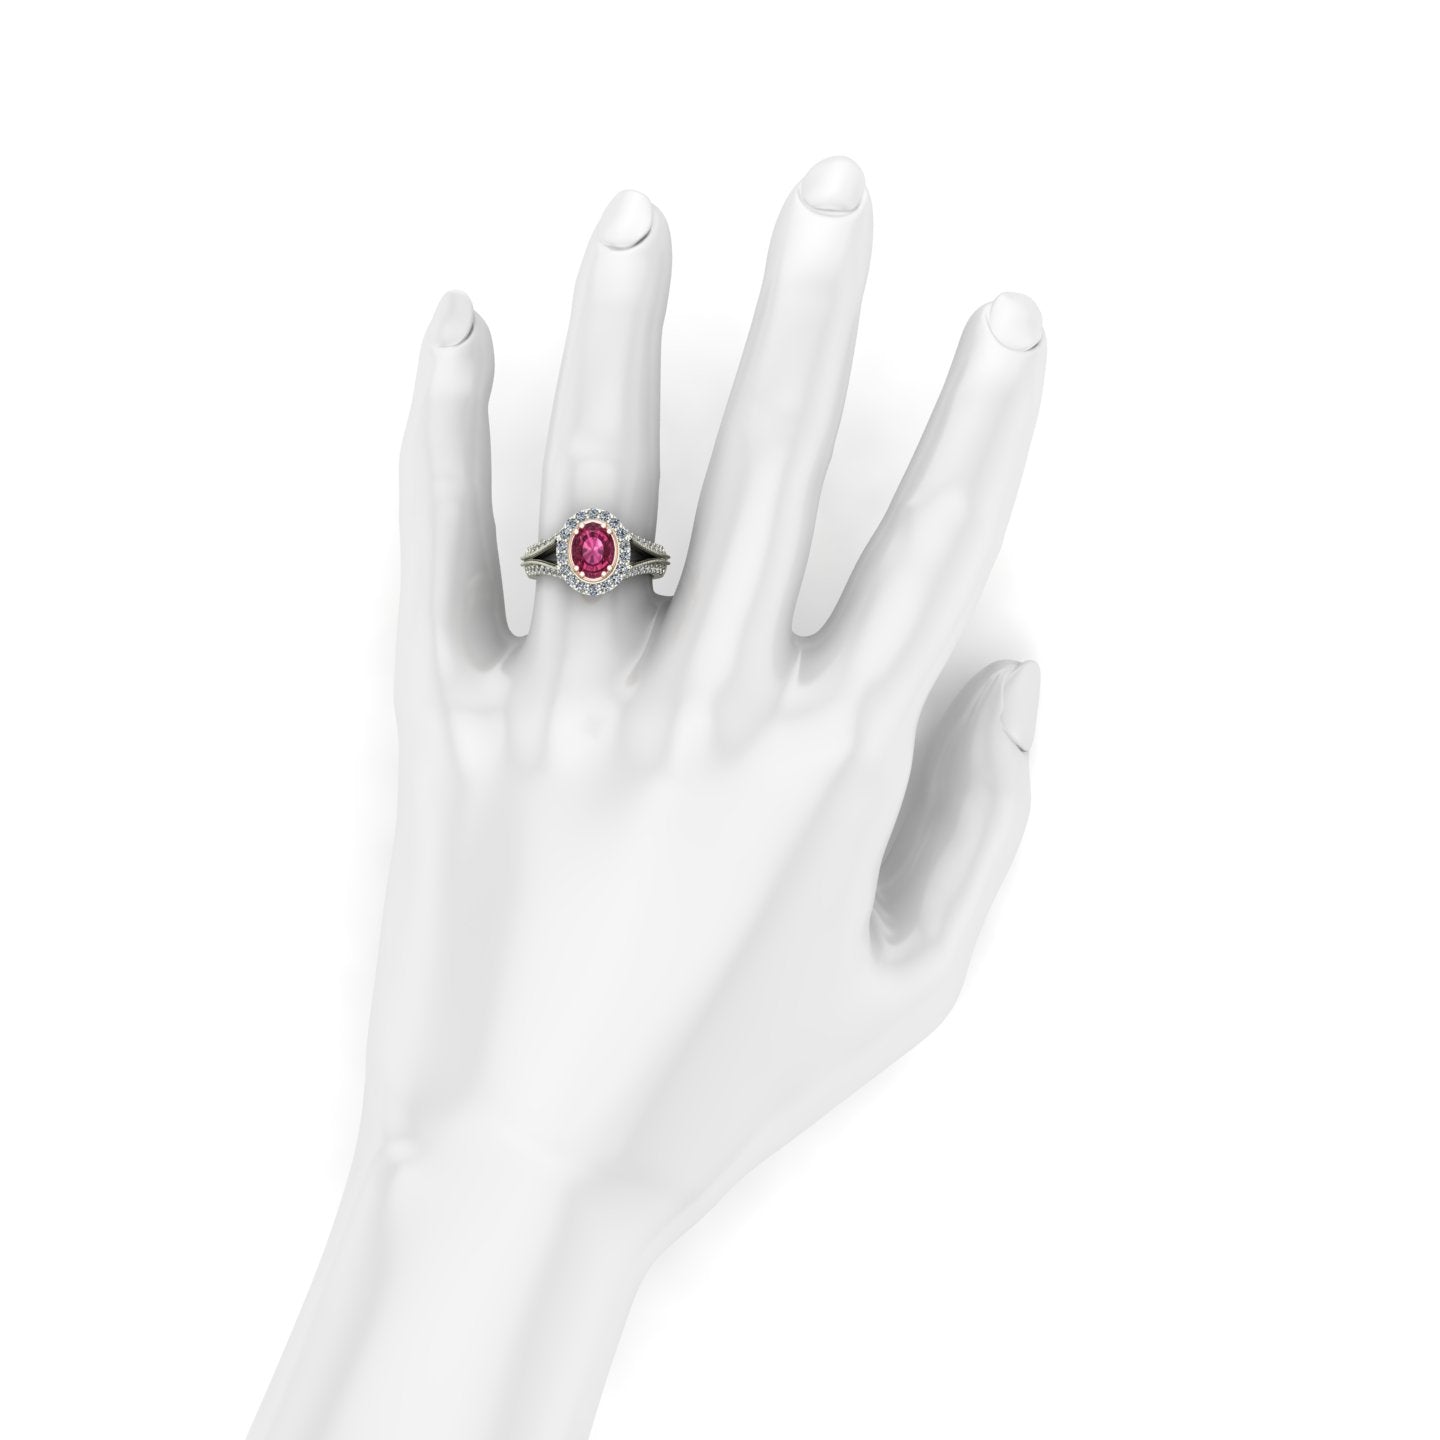 oval pink tourmaline and diamond two tone scroll ring in 14k rose and white gold - Charles Babb Designs - on hand